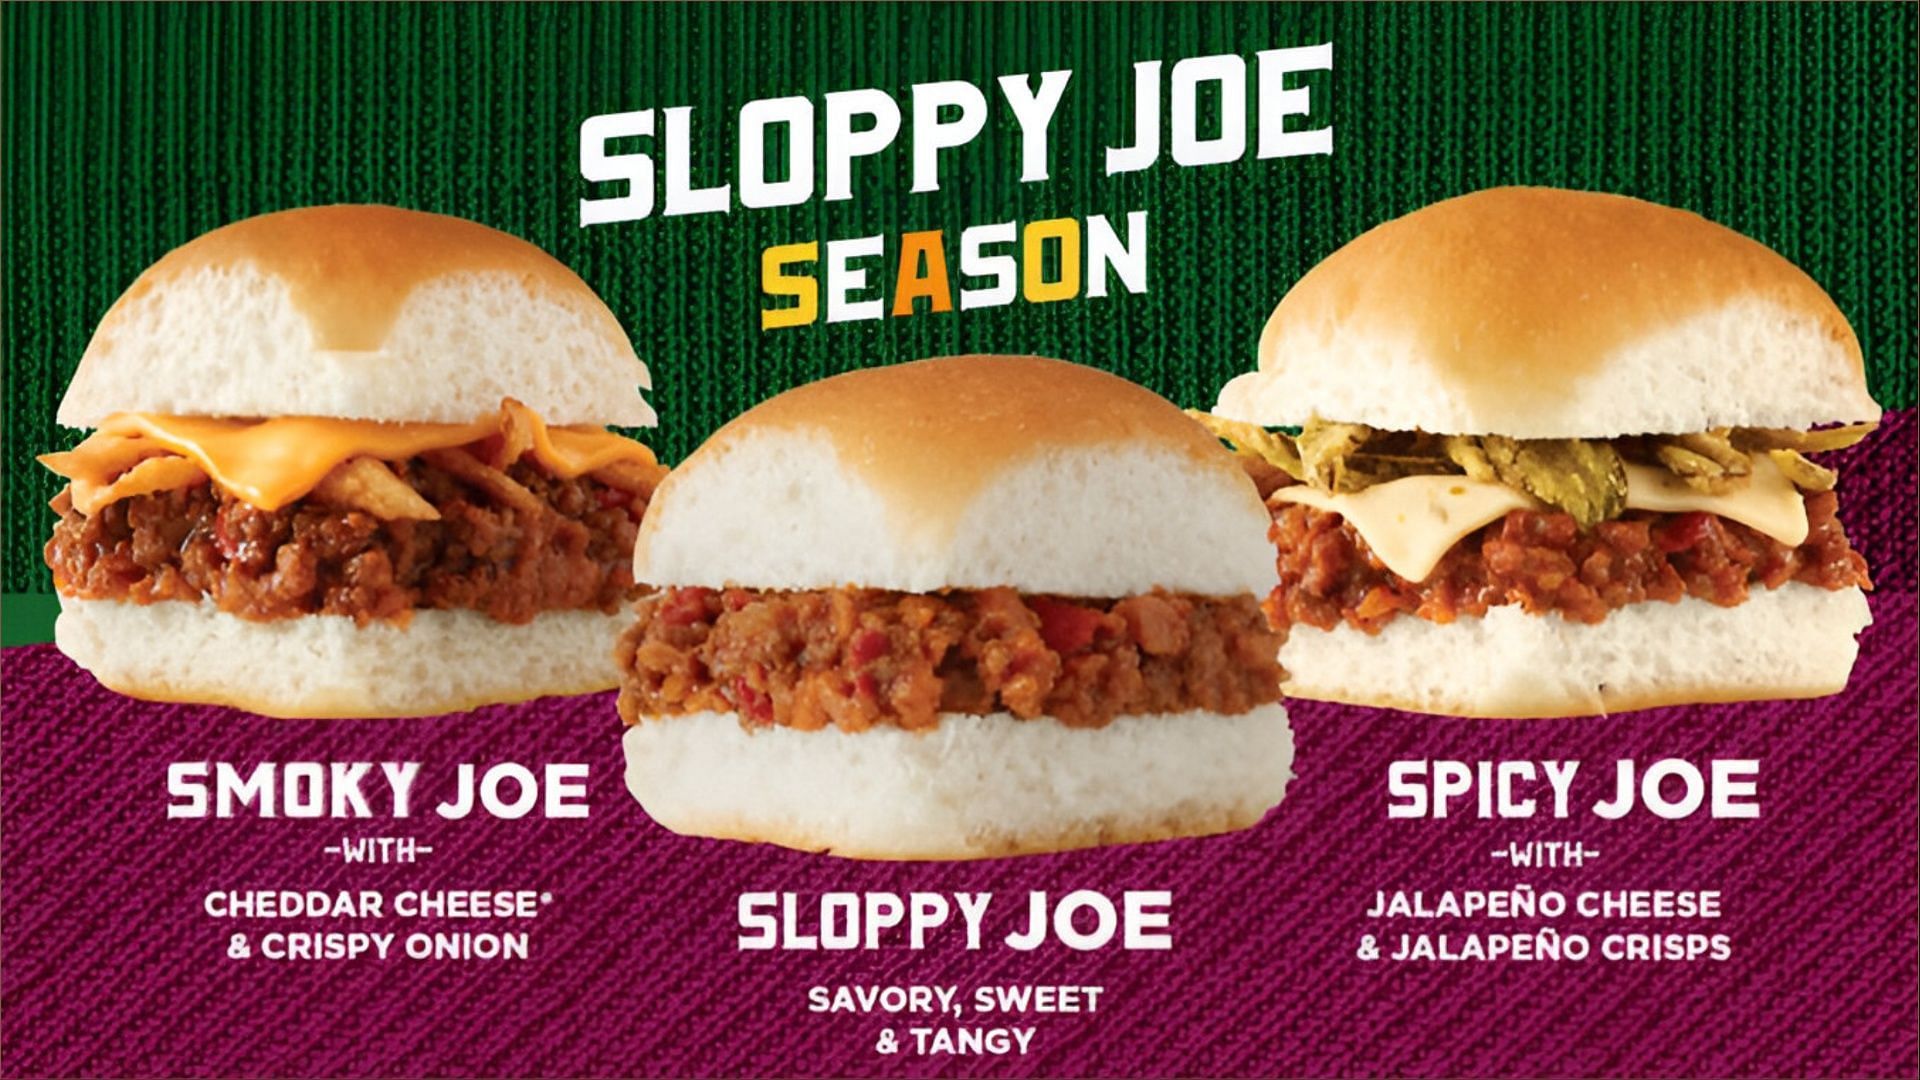 The Sloppy Joe sliders and Mac &amp; Cheese Nibblers hit stores nationwide on November 28 (Image via White Castle)